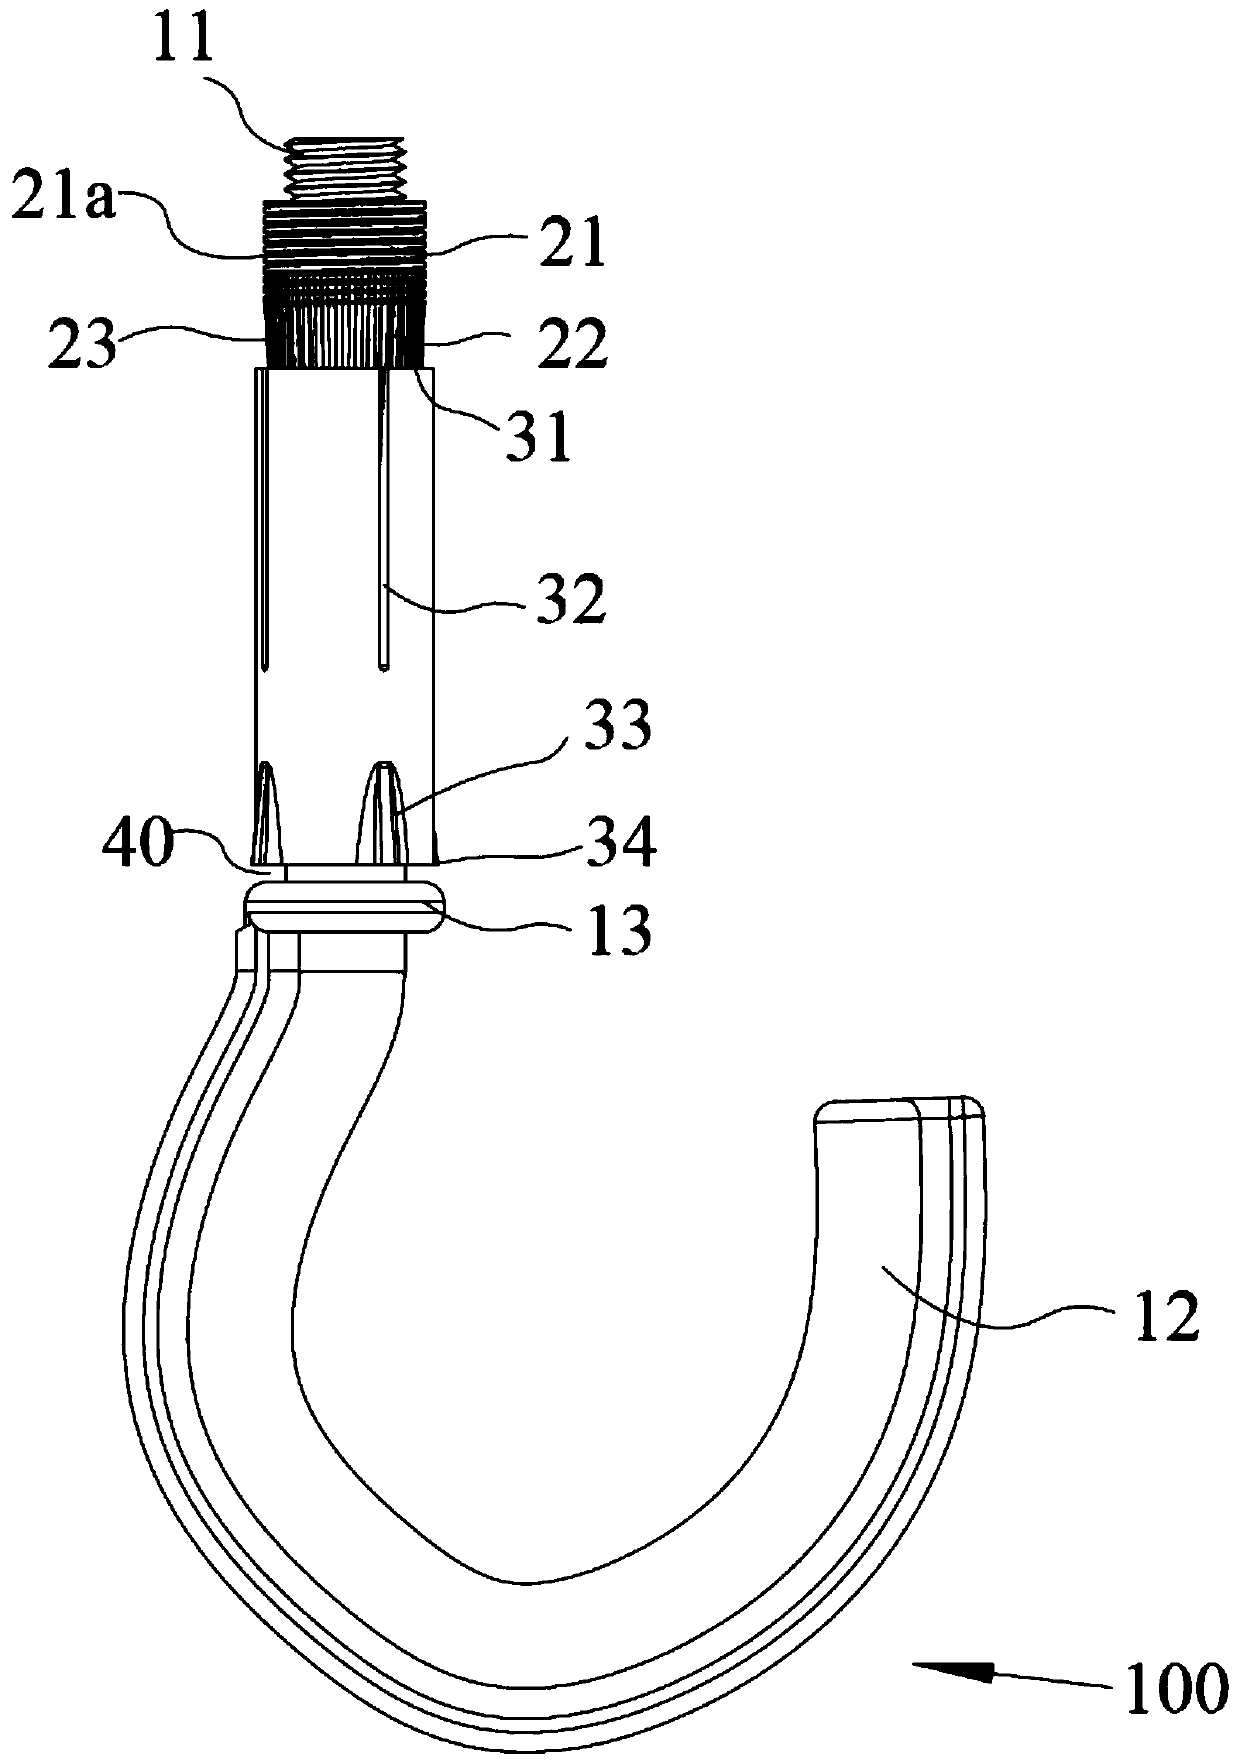 Quickly-and-fixedly-mounted sleeve, bolt and anchor rod mounting assembly